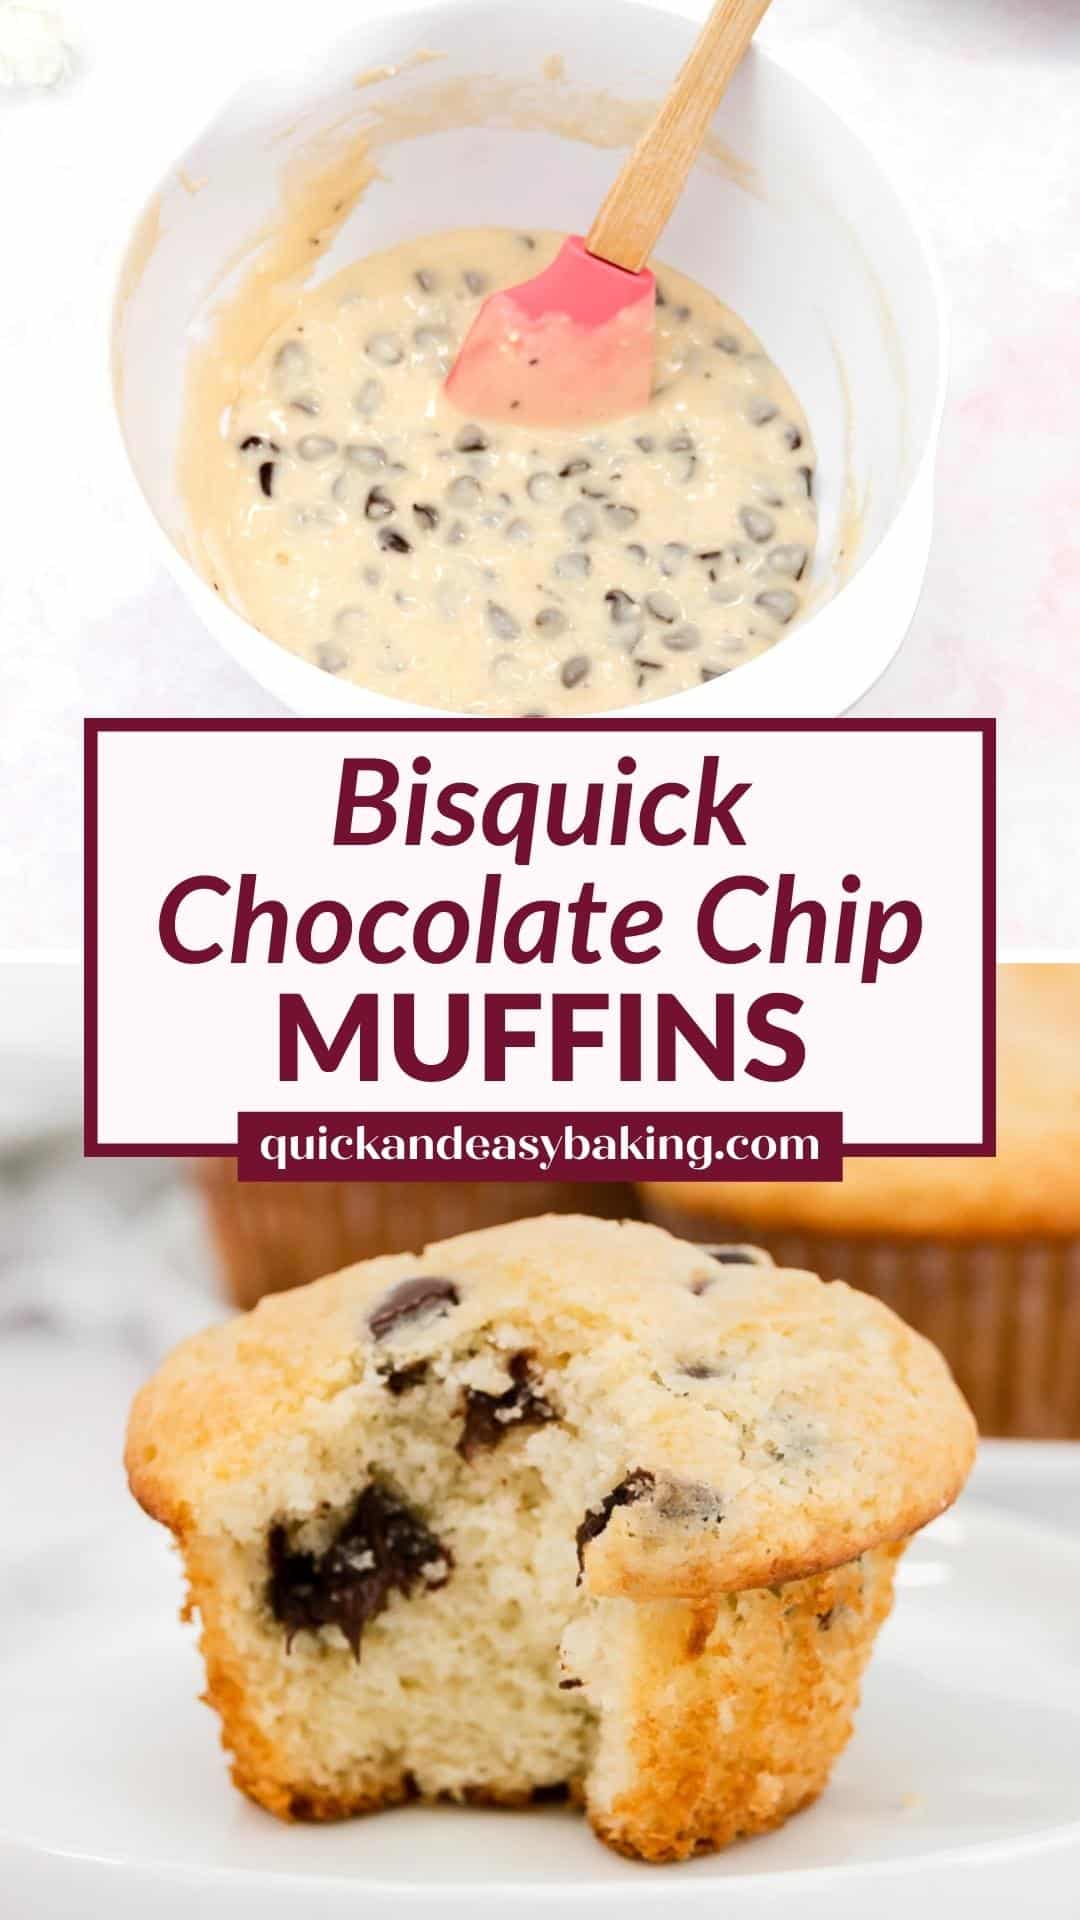 Collage of muffin batter and chocolate chip muffin with bit out and text.